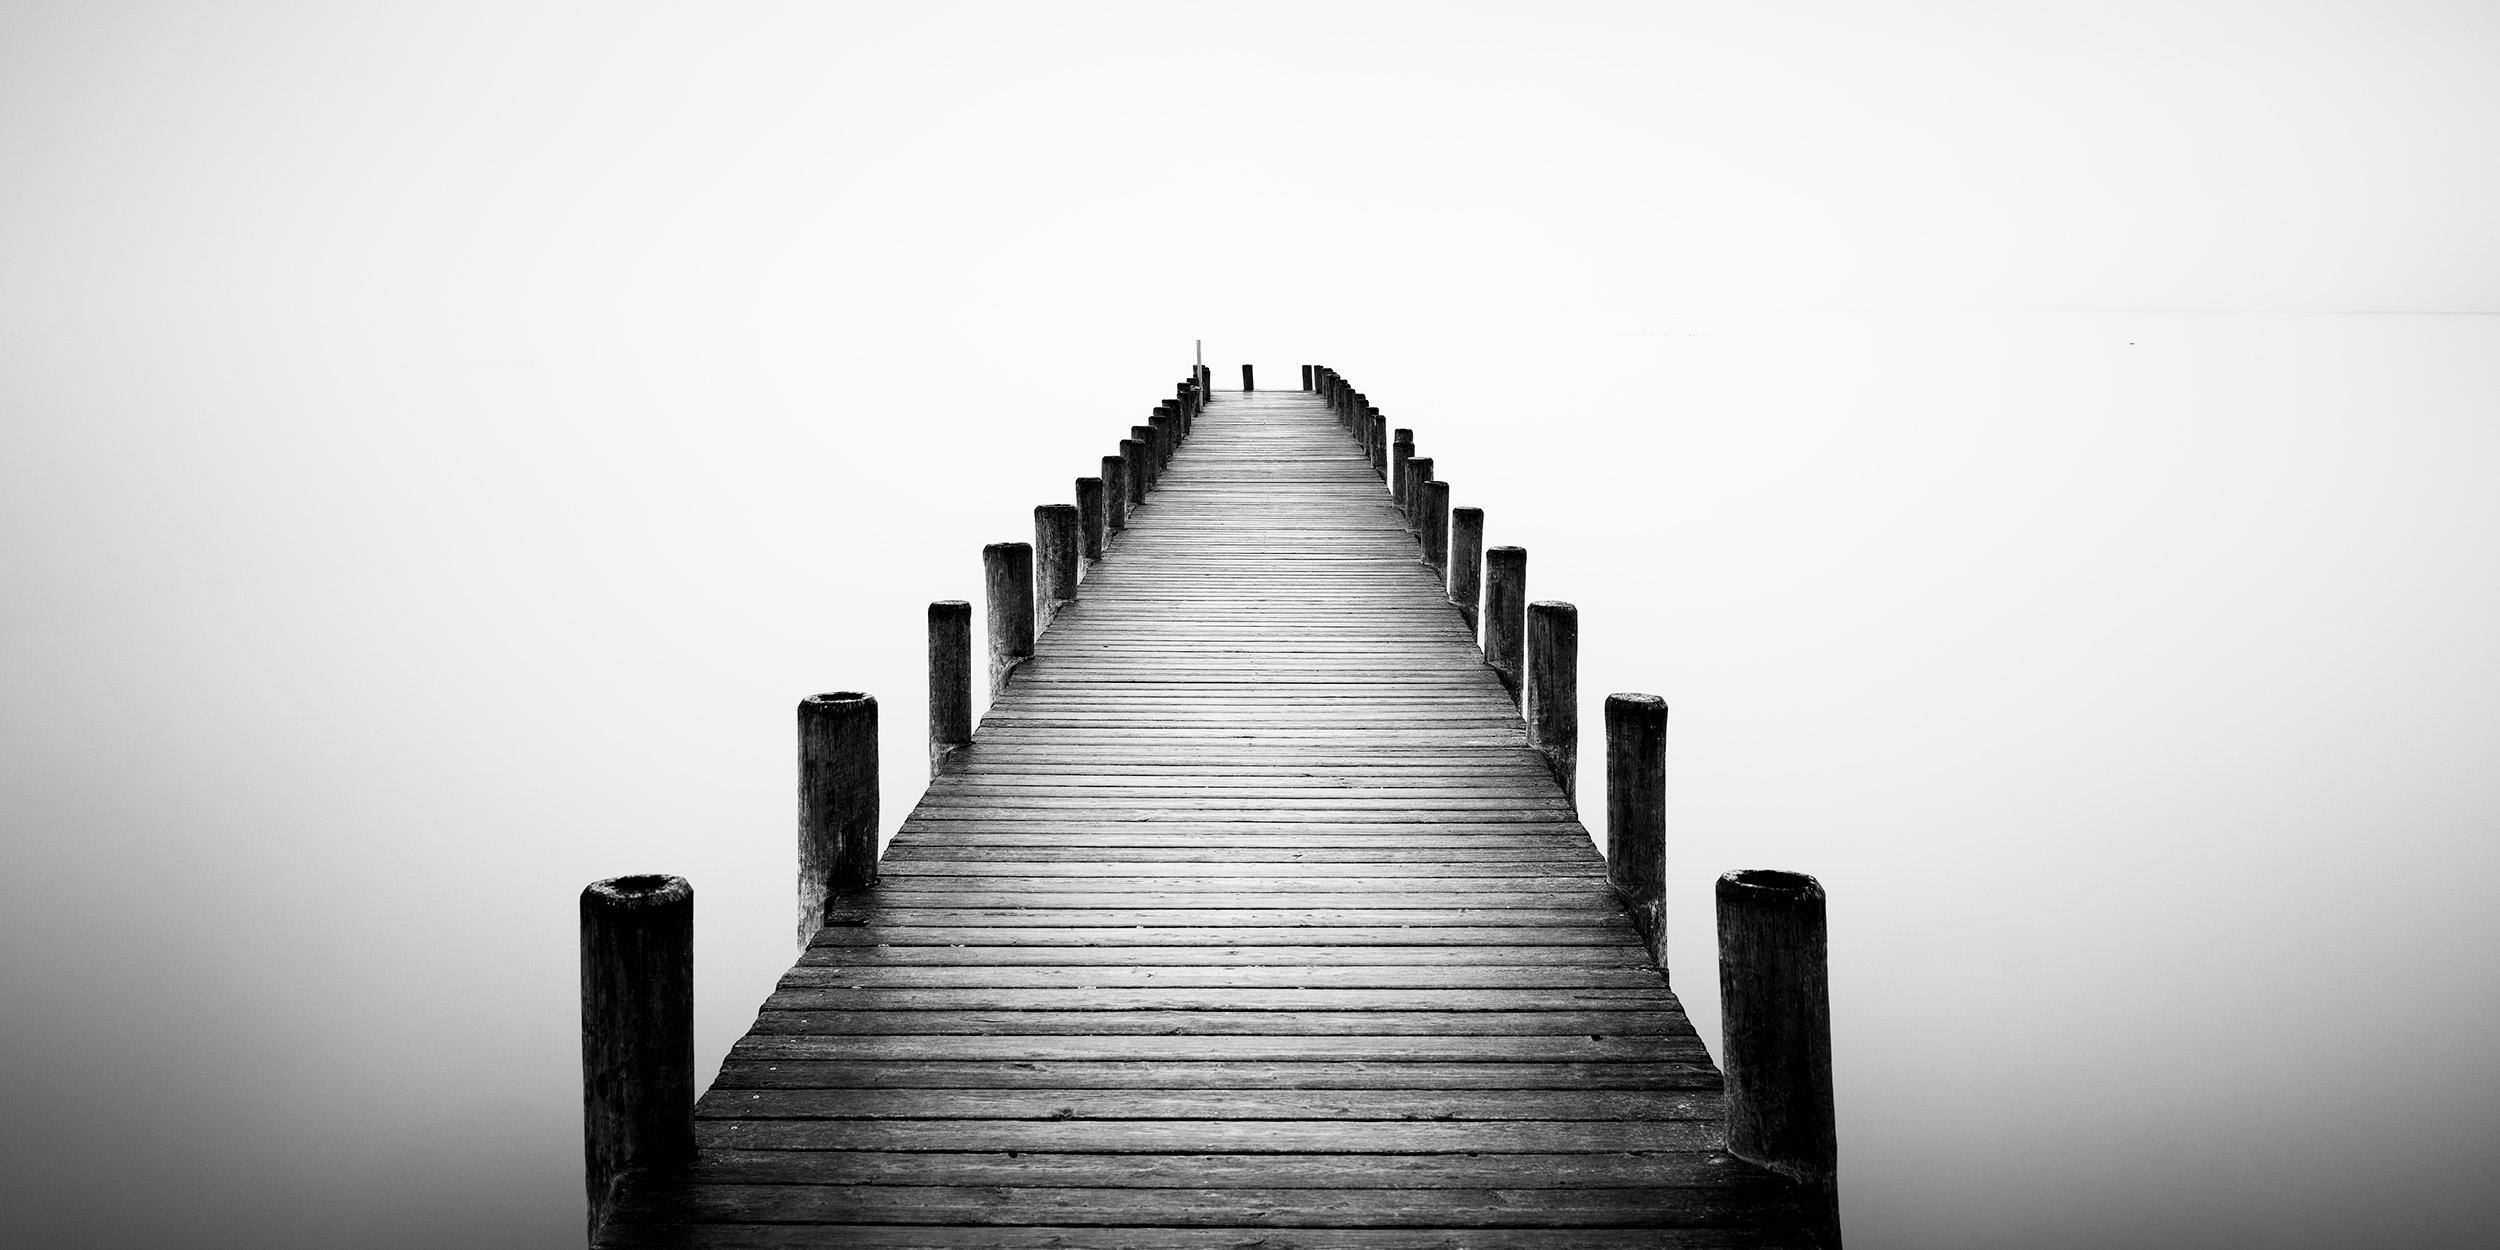 Gerald Berghammer Landscape Photograph - Pier on misty Lake Panorama, black and white long exposure waterscape art photo